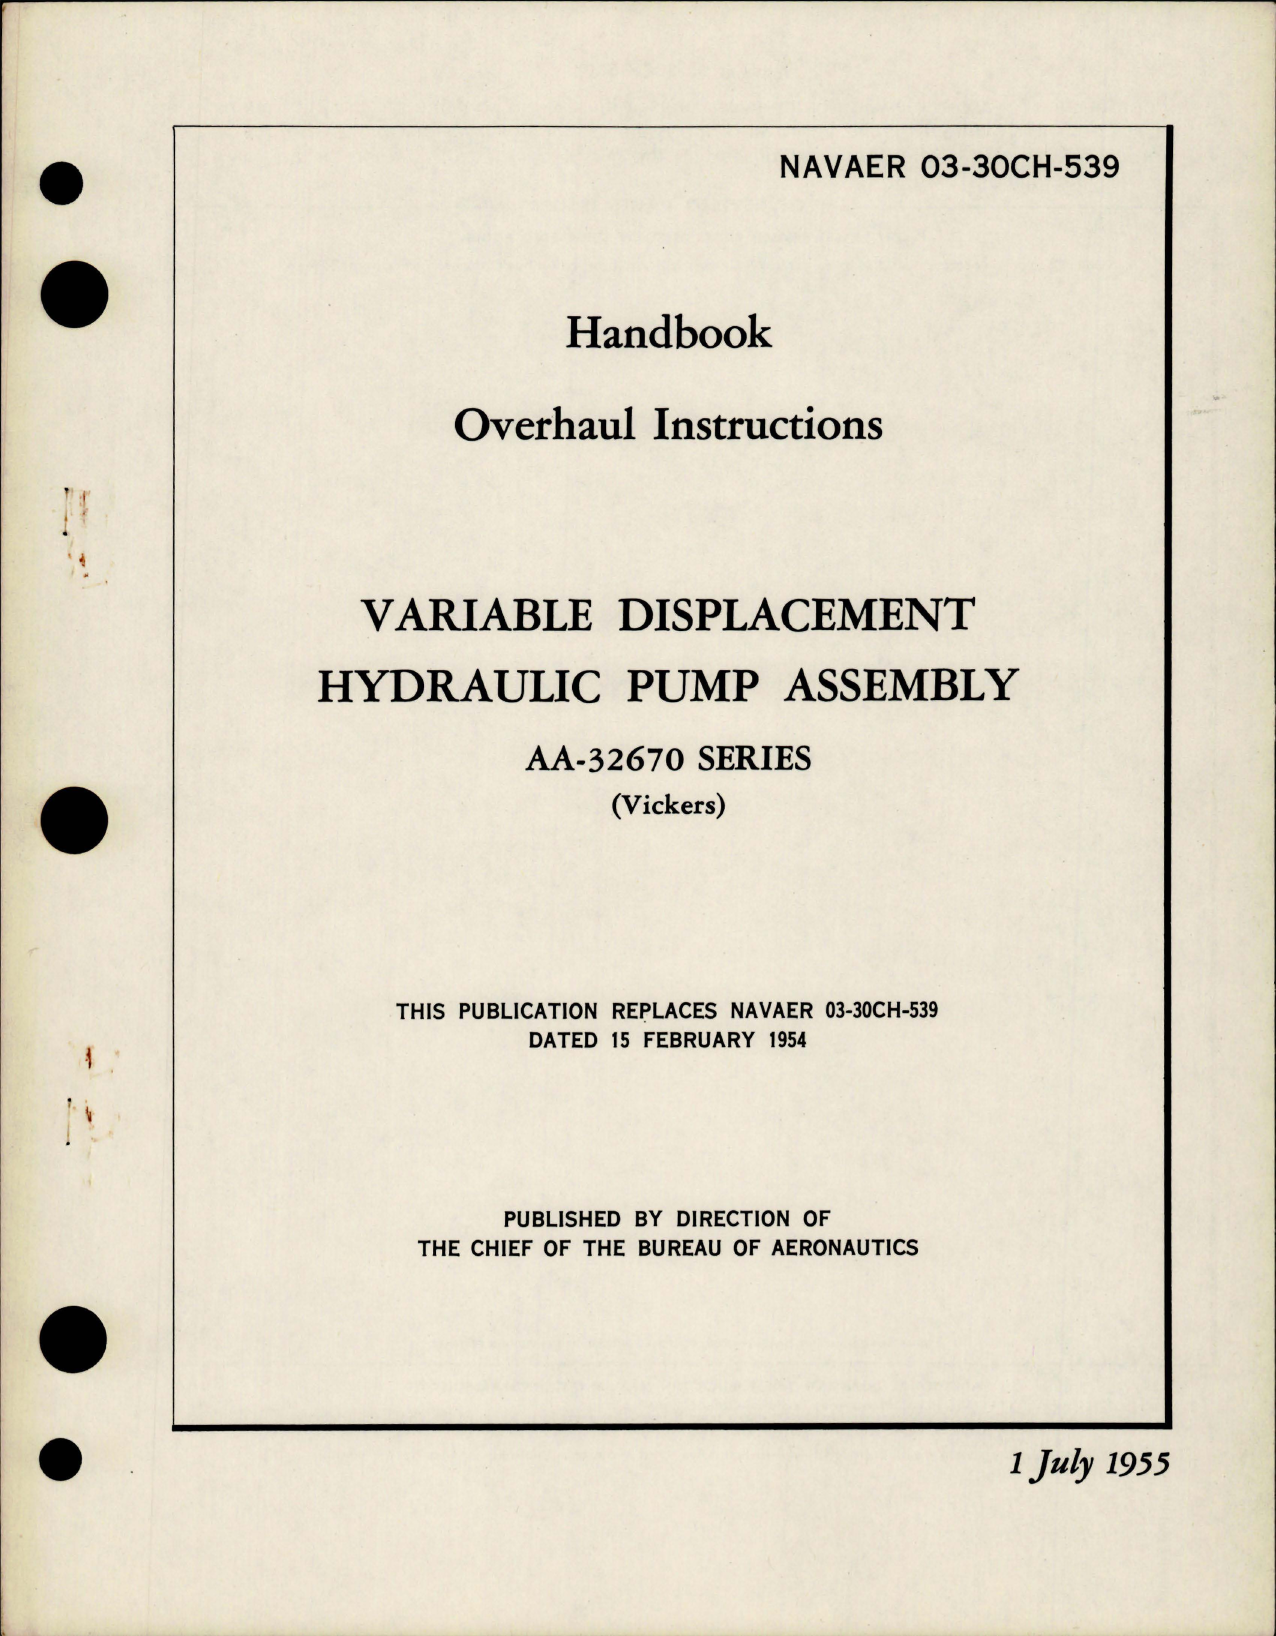 Sample page 1 from AirCorps Library document: Overhaul Instructions for Variable Displacement Hydraulic Pump Assembly - AA-32670 Series